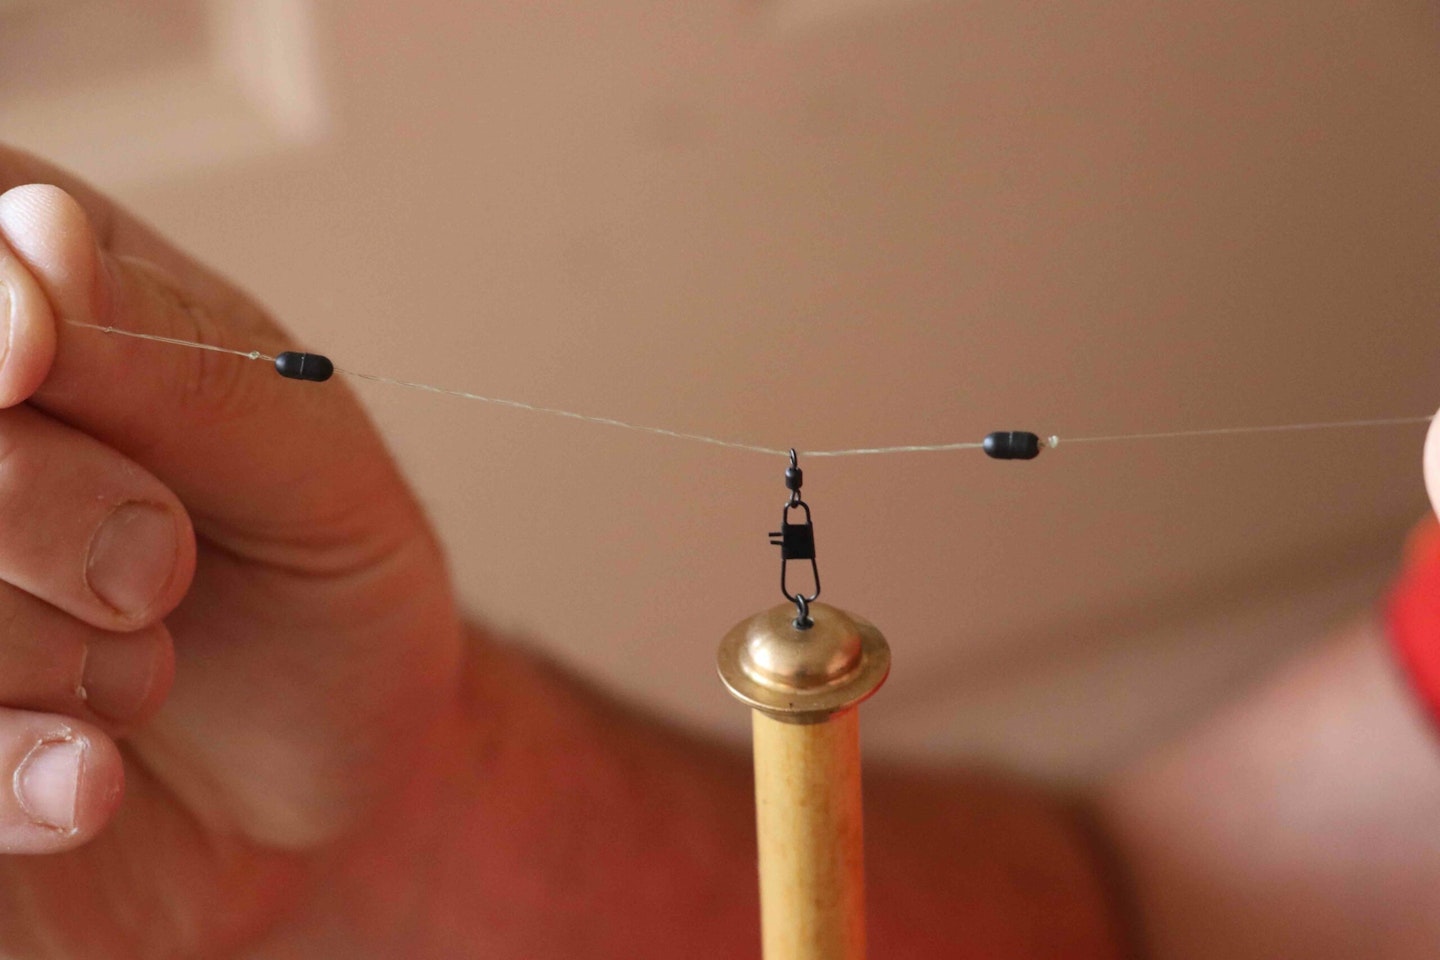 A waggler adaptor allows you to remain versatile.